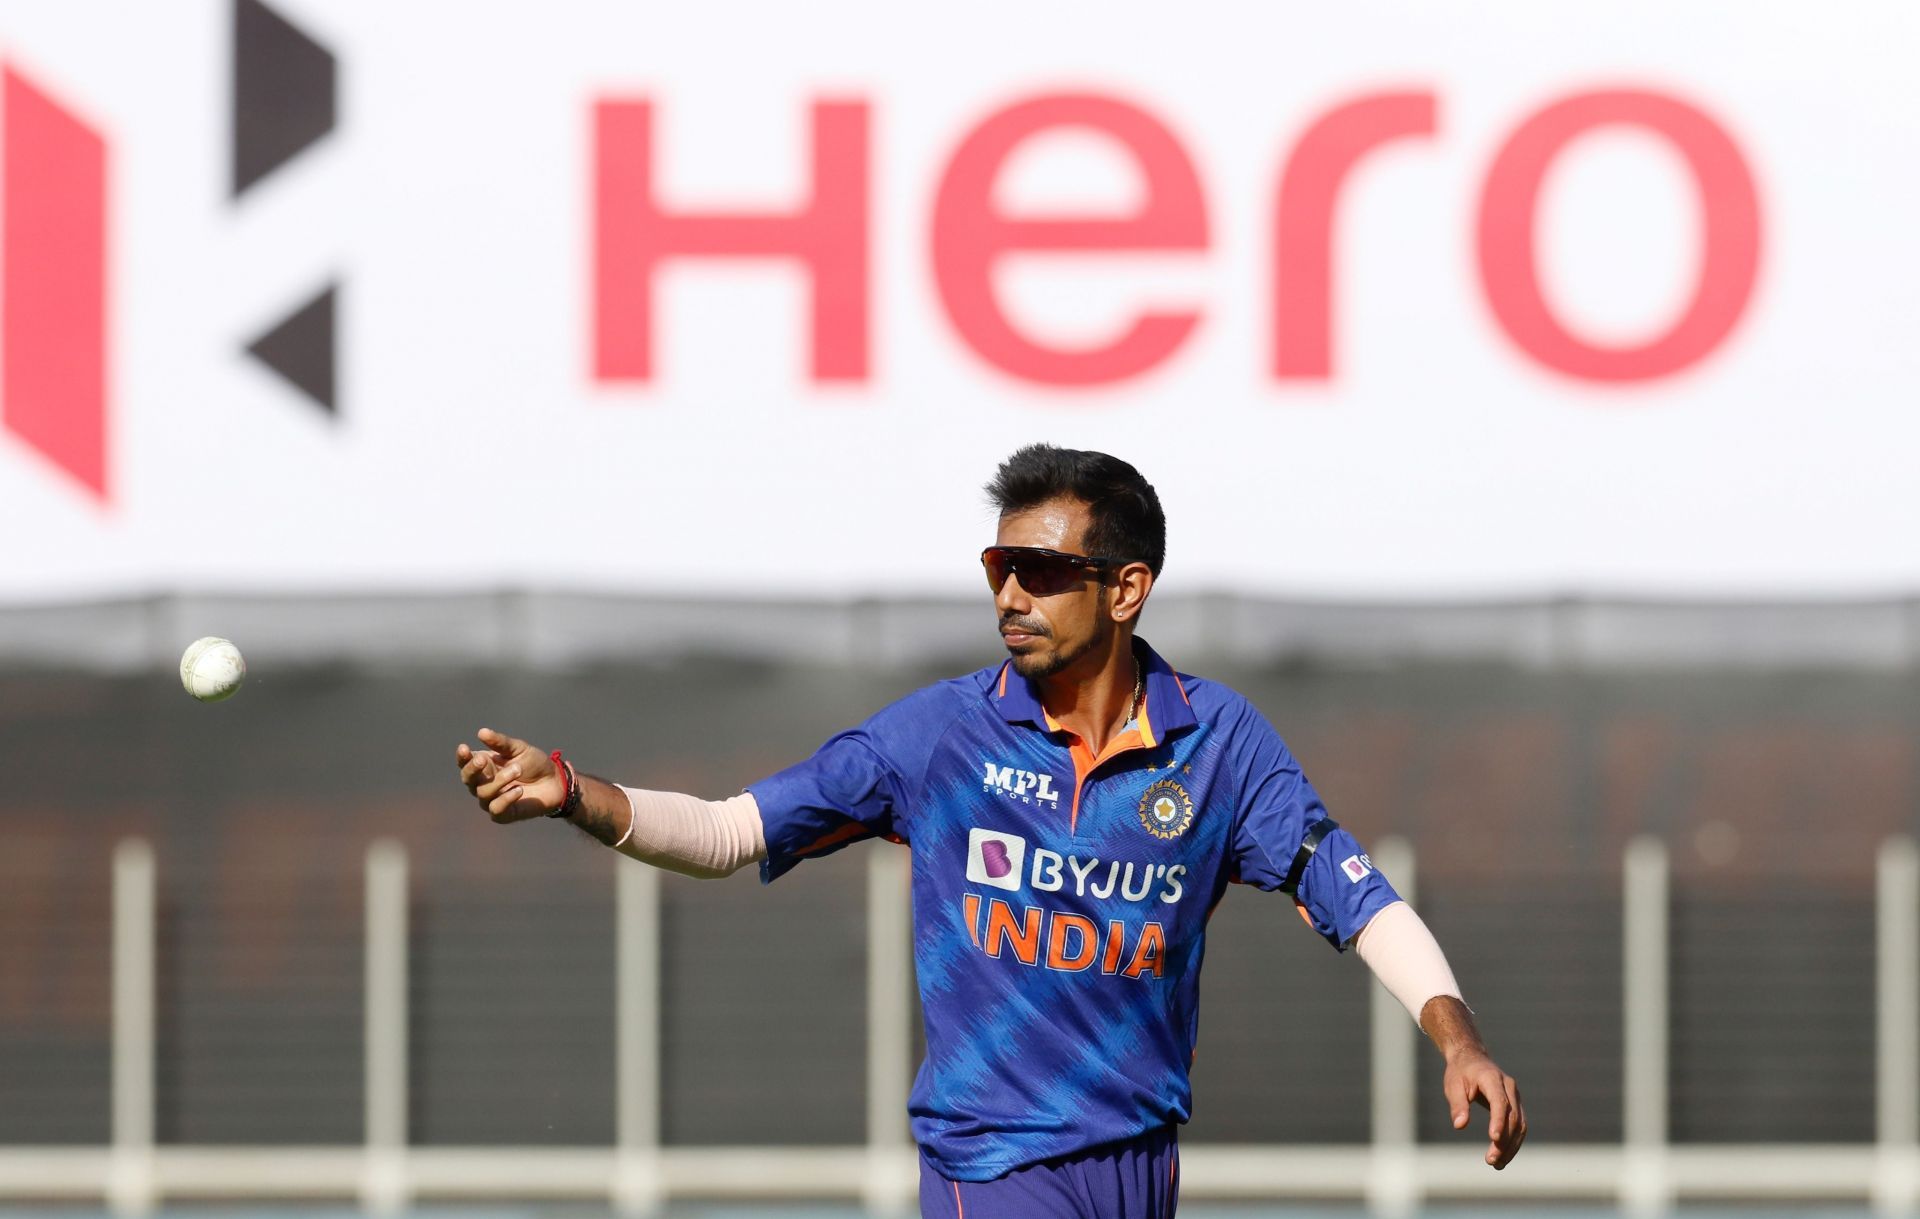 Yuzvendra Chahal snared four wickets in the 1st ODI against West Indies [P/C: BCCI]